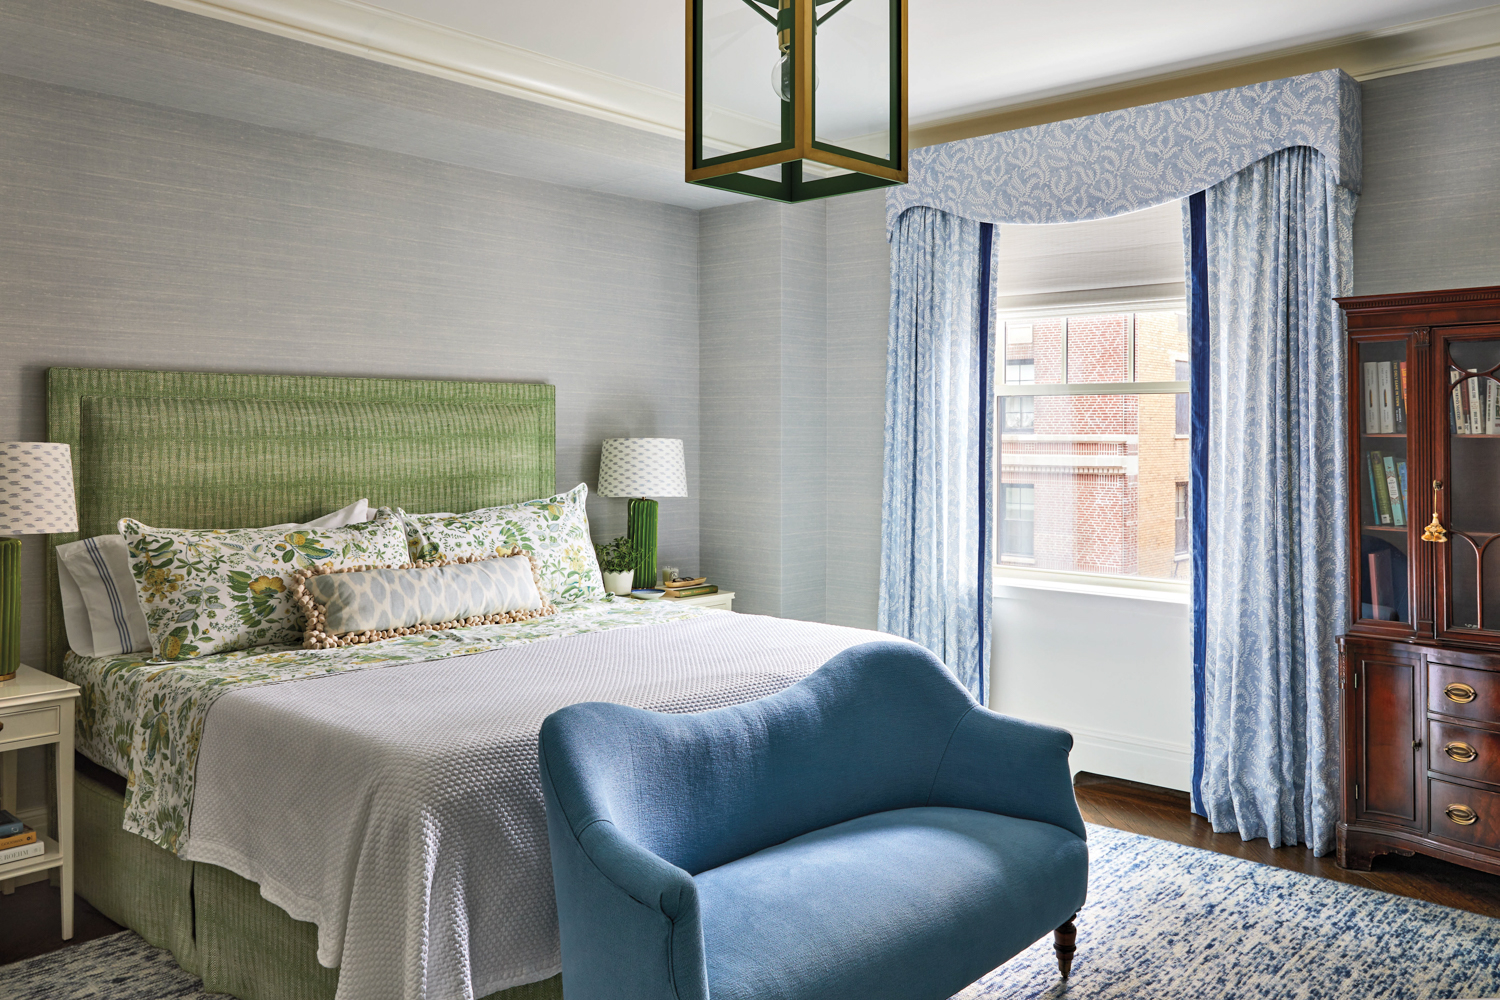 traditional bedroom in a blue-green...